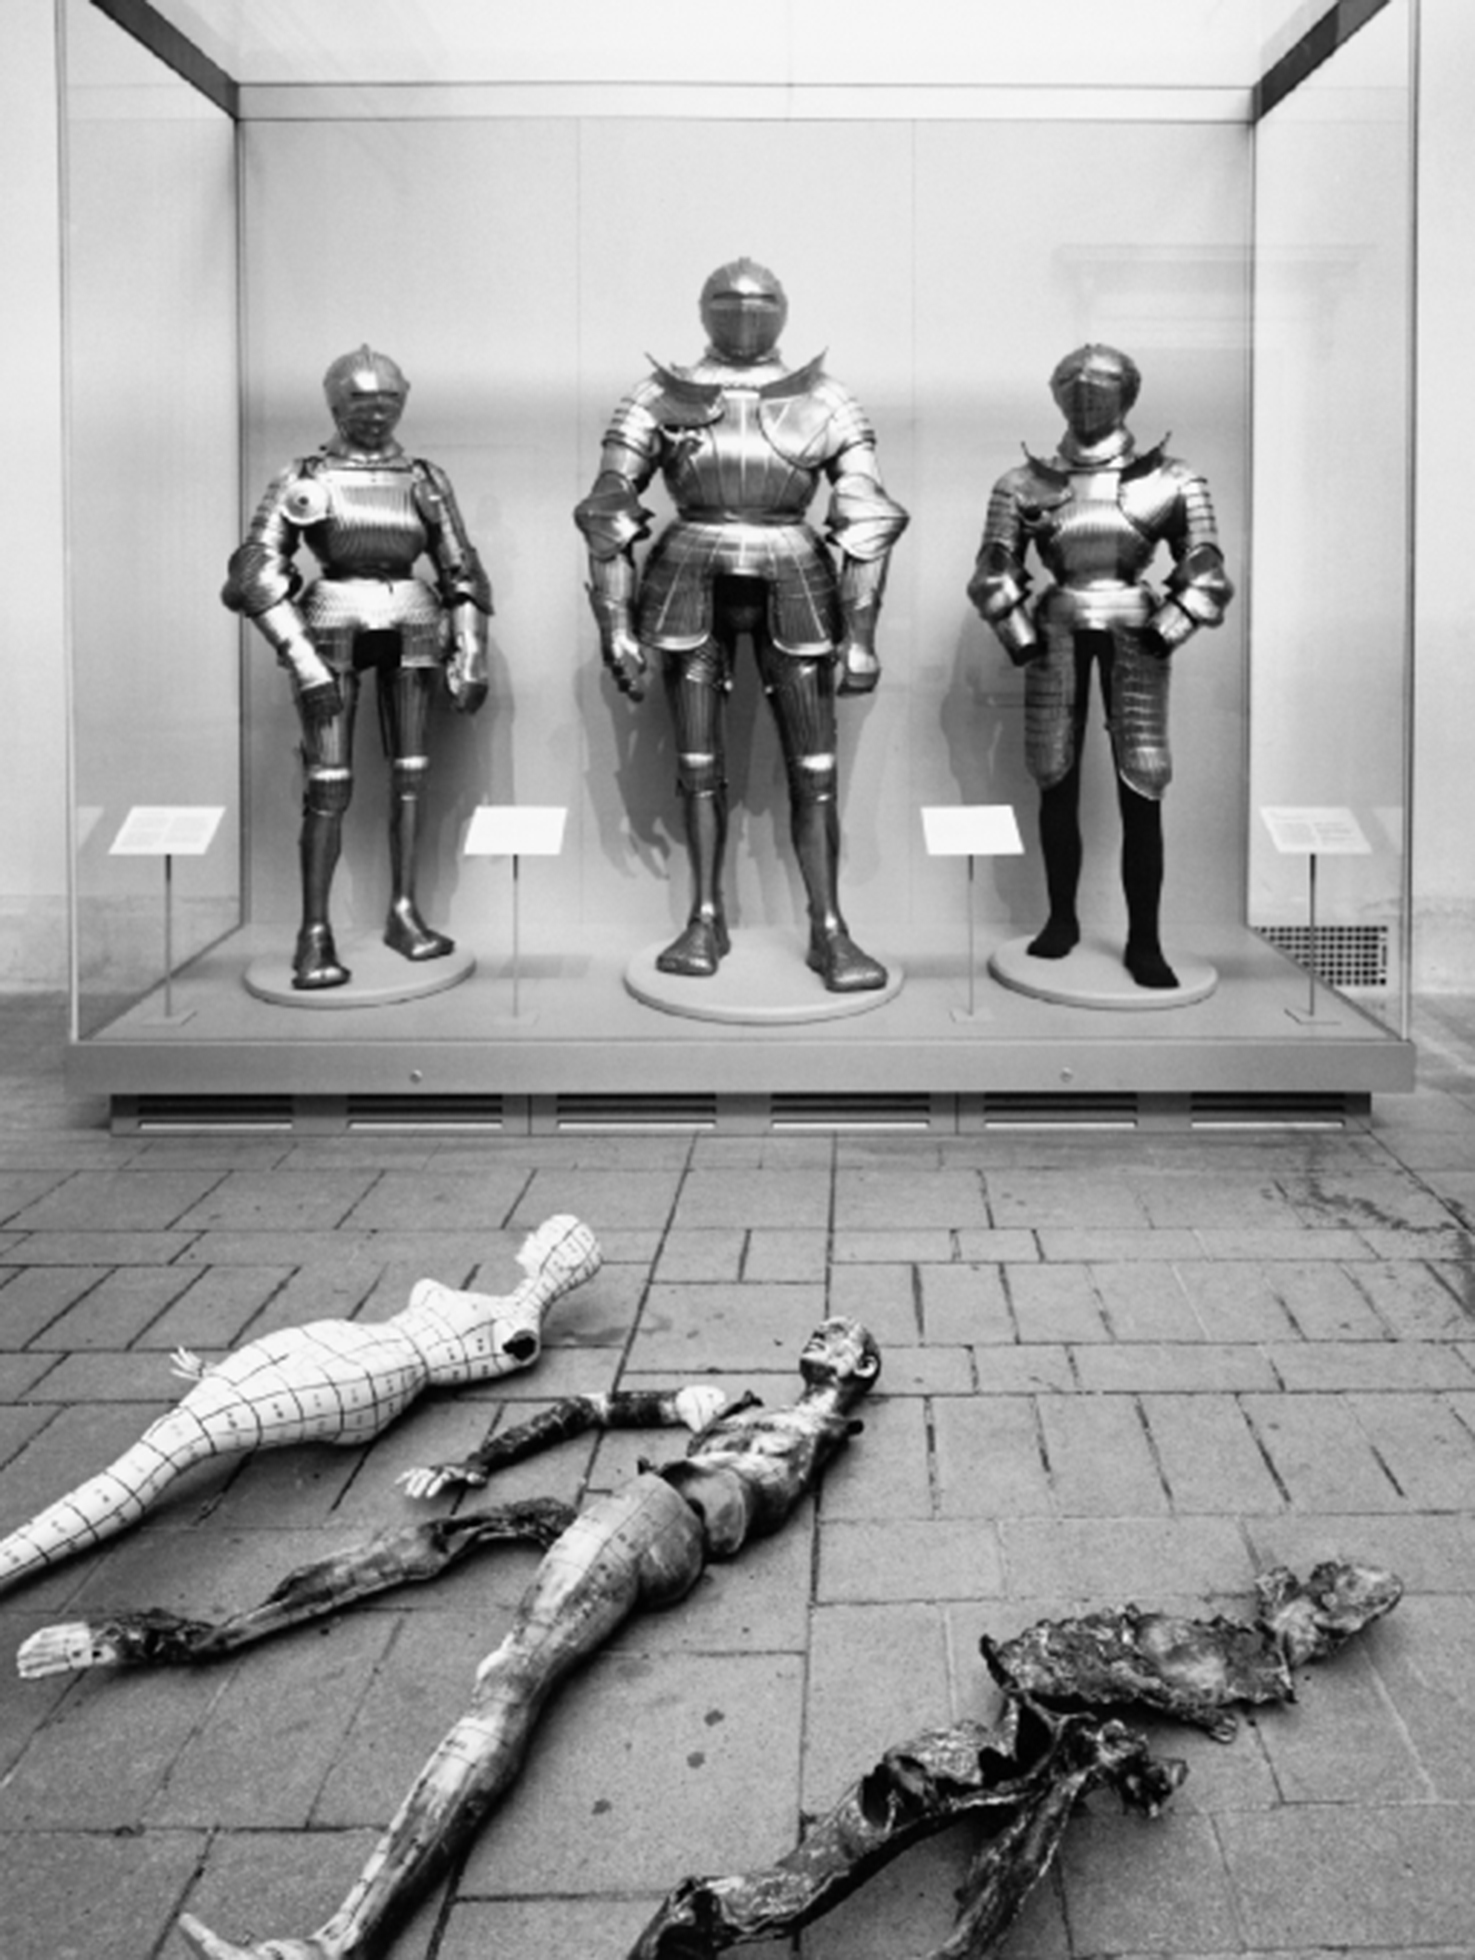 A large display case with three suits of armor standing next to each other. In front of the case on the tile floor are broken mannequins with missing arms and legs.